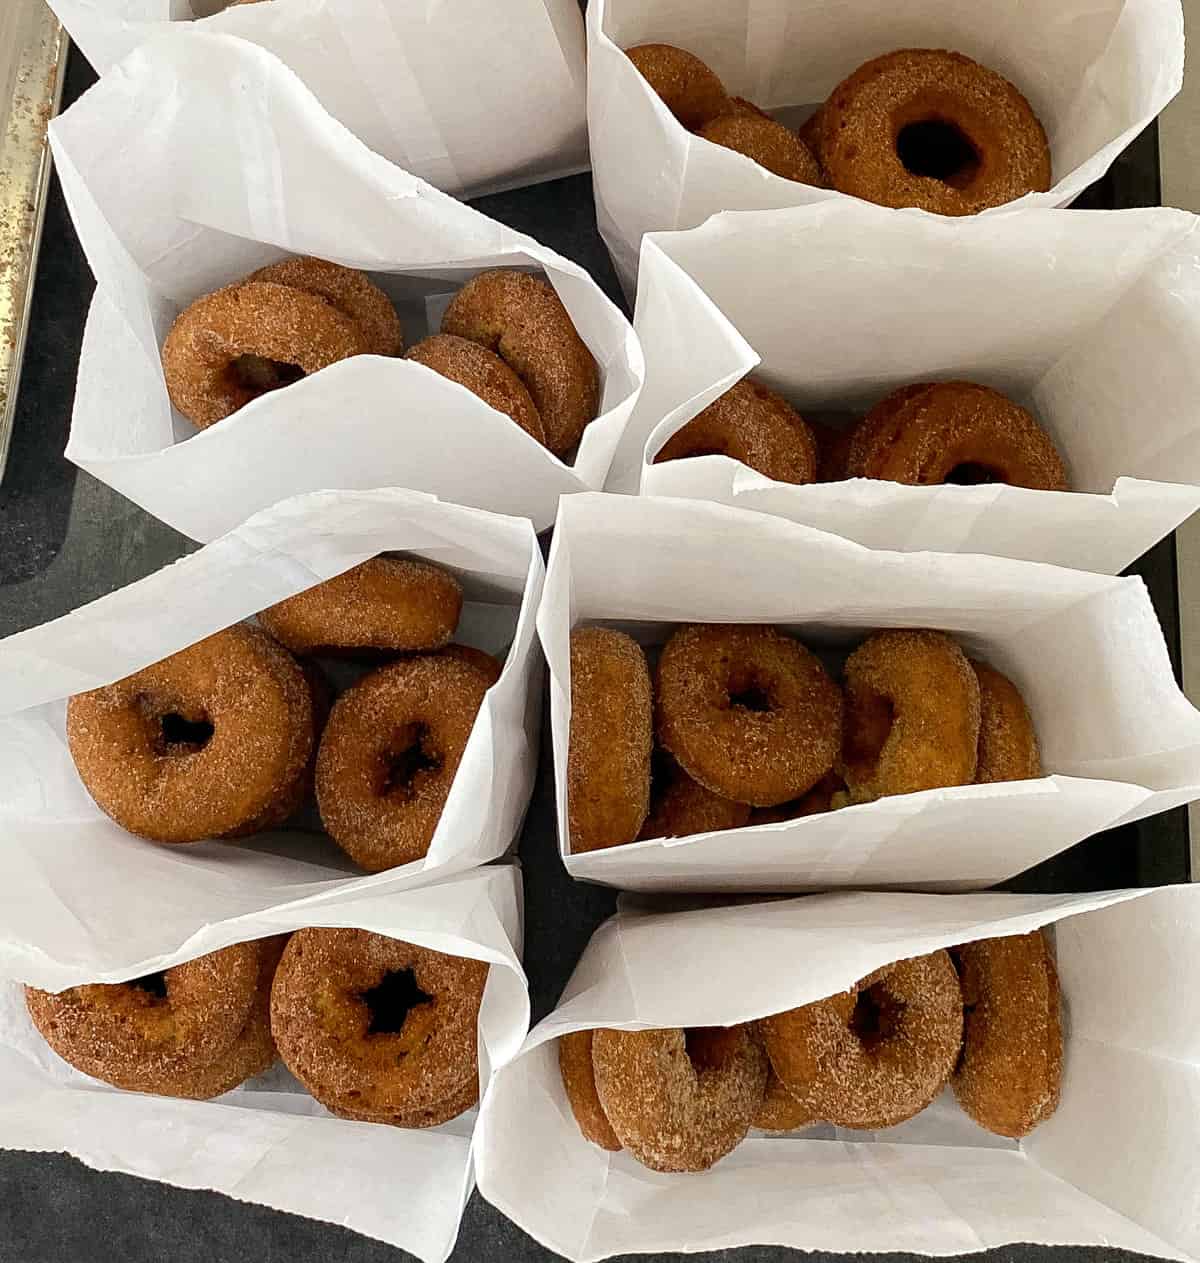 White paper bags filled with apple cider donuts.